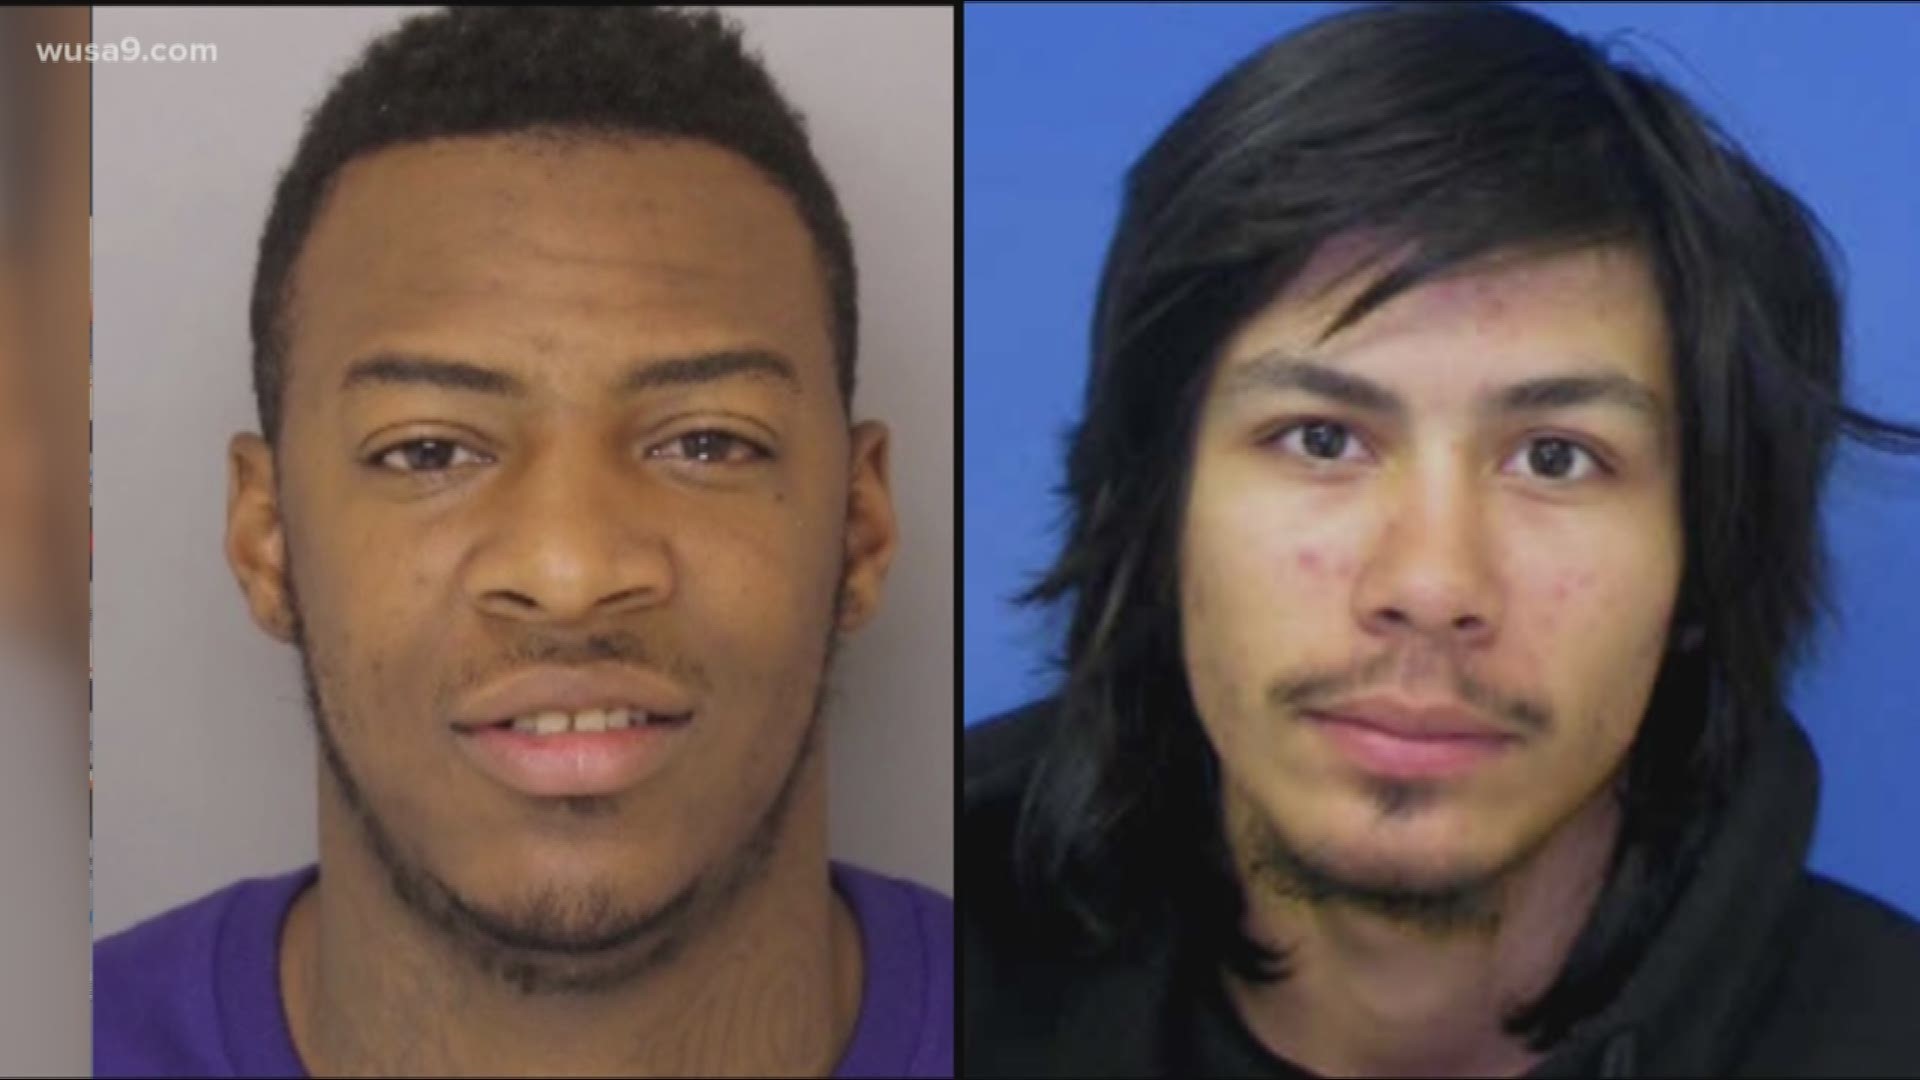 Police said the two men broke into 19 vehicles in Bowie and stole the airbags on Wednesday. One man has since been arrested.